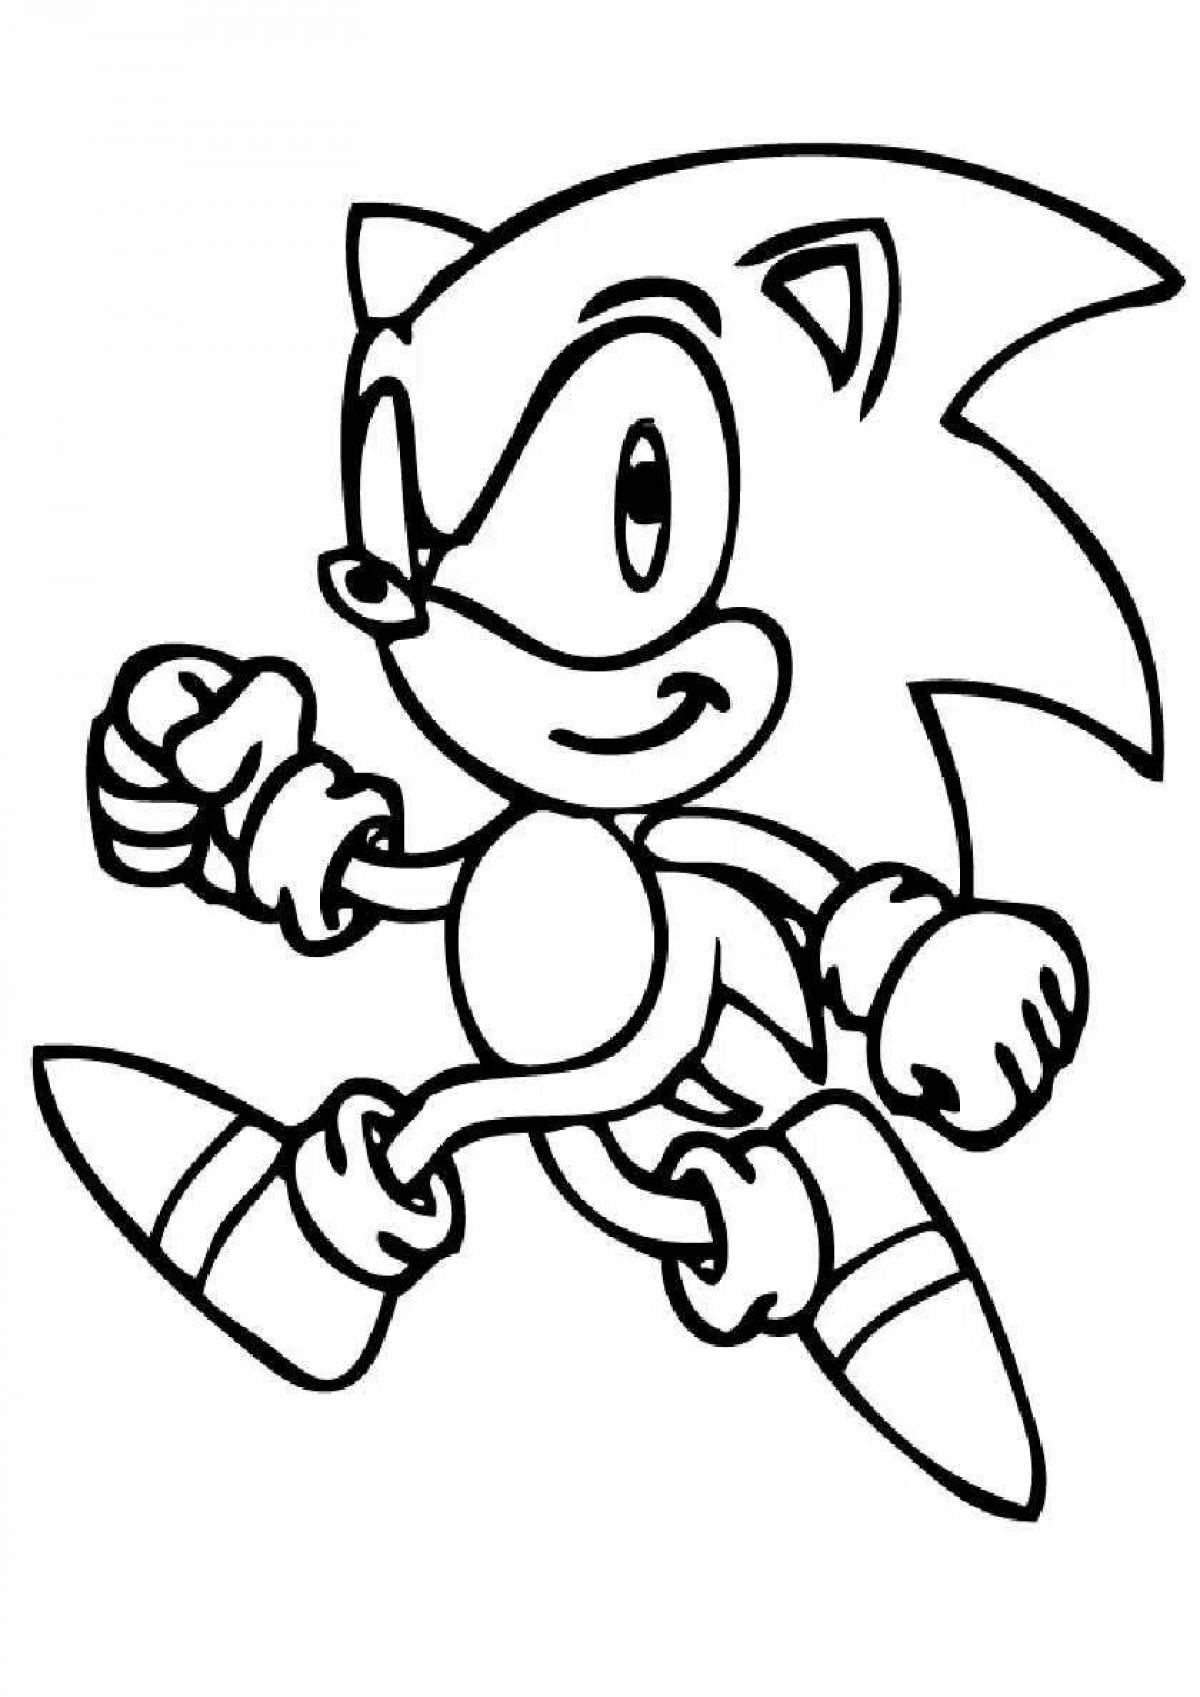 A fascinating sonic coloring book for children 5-6 years old